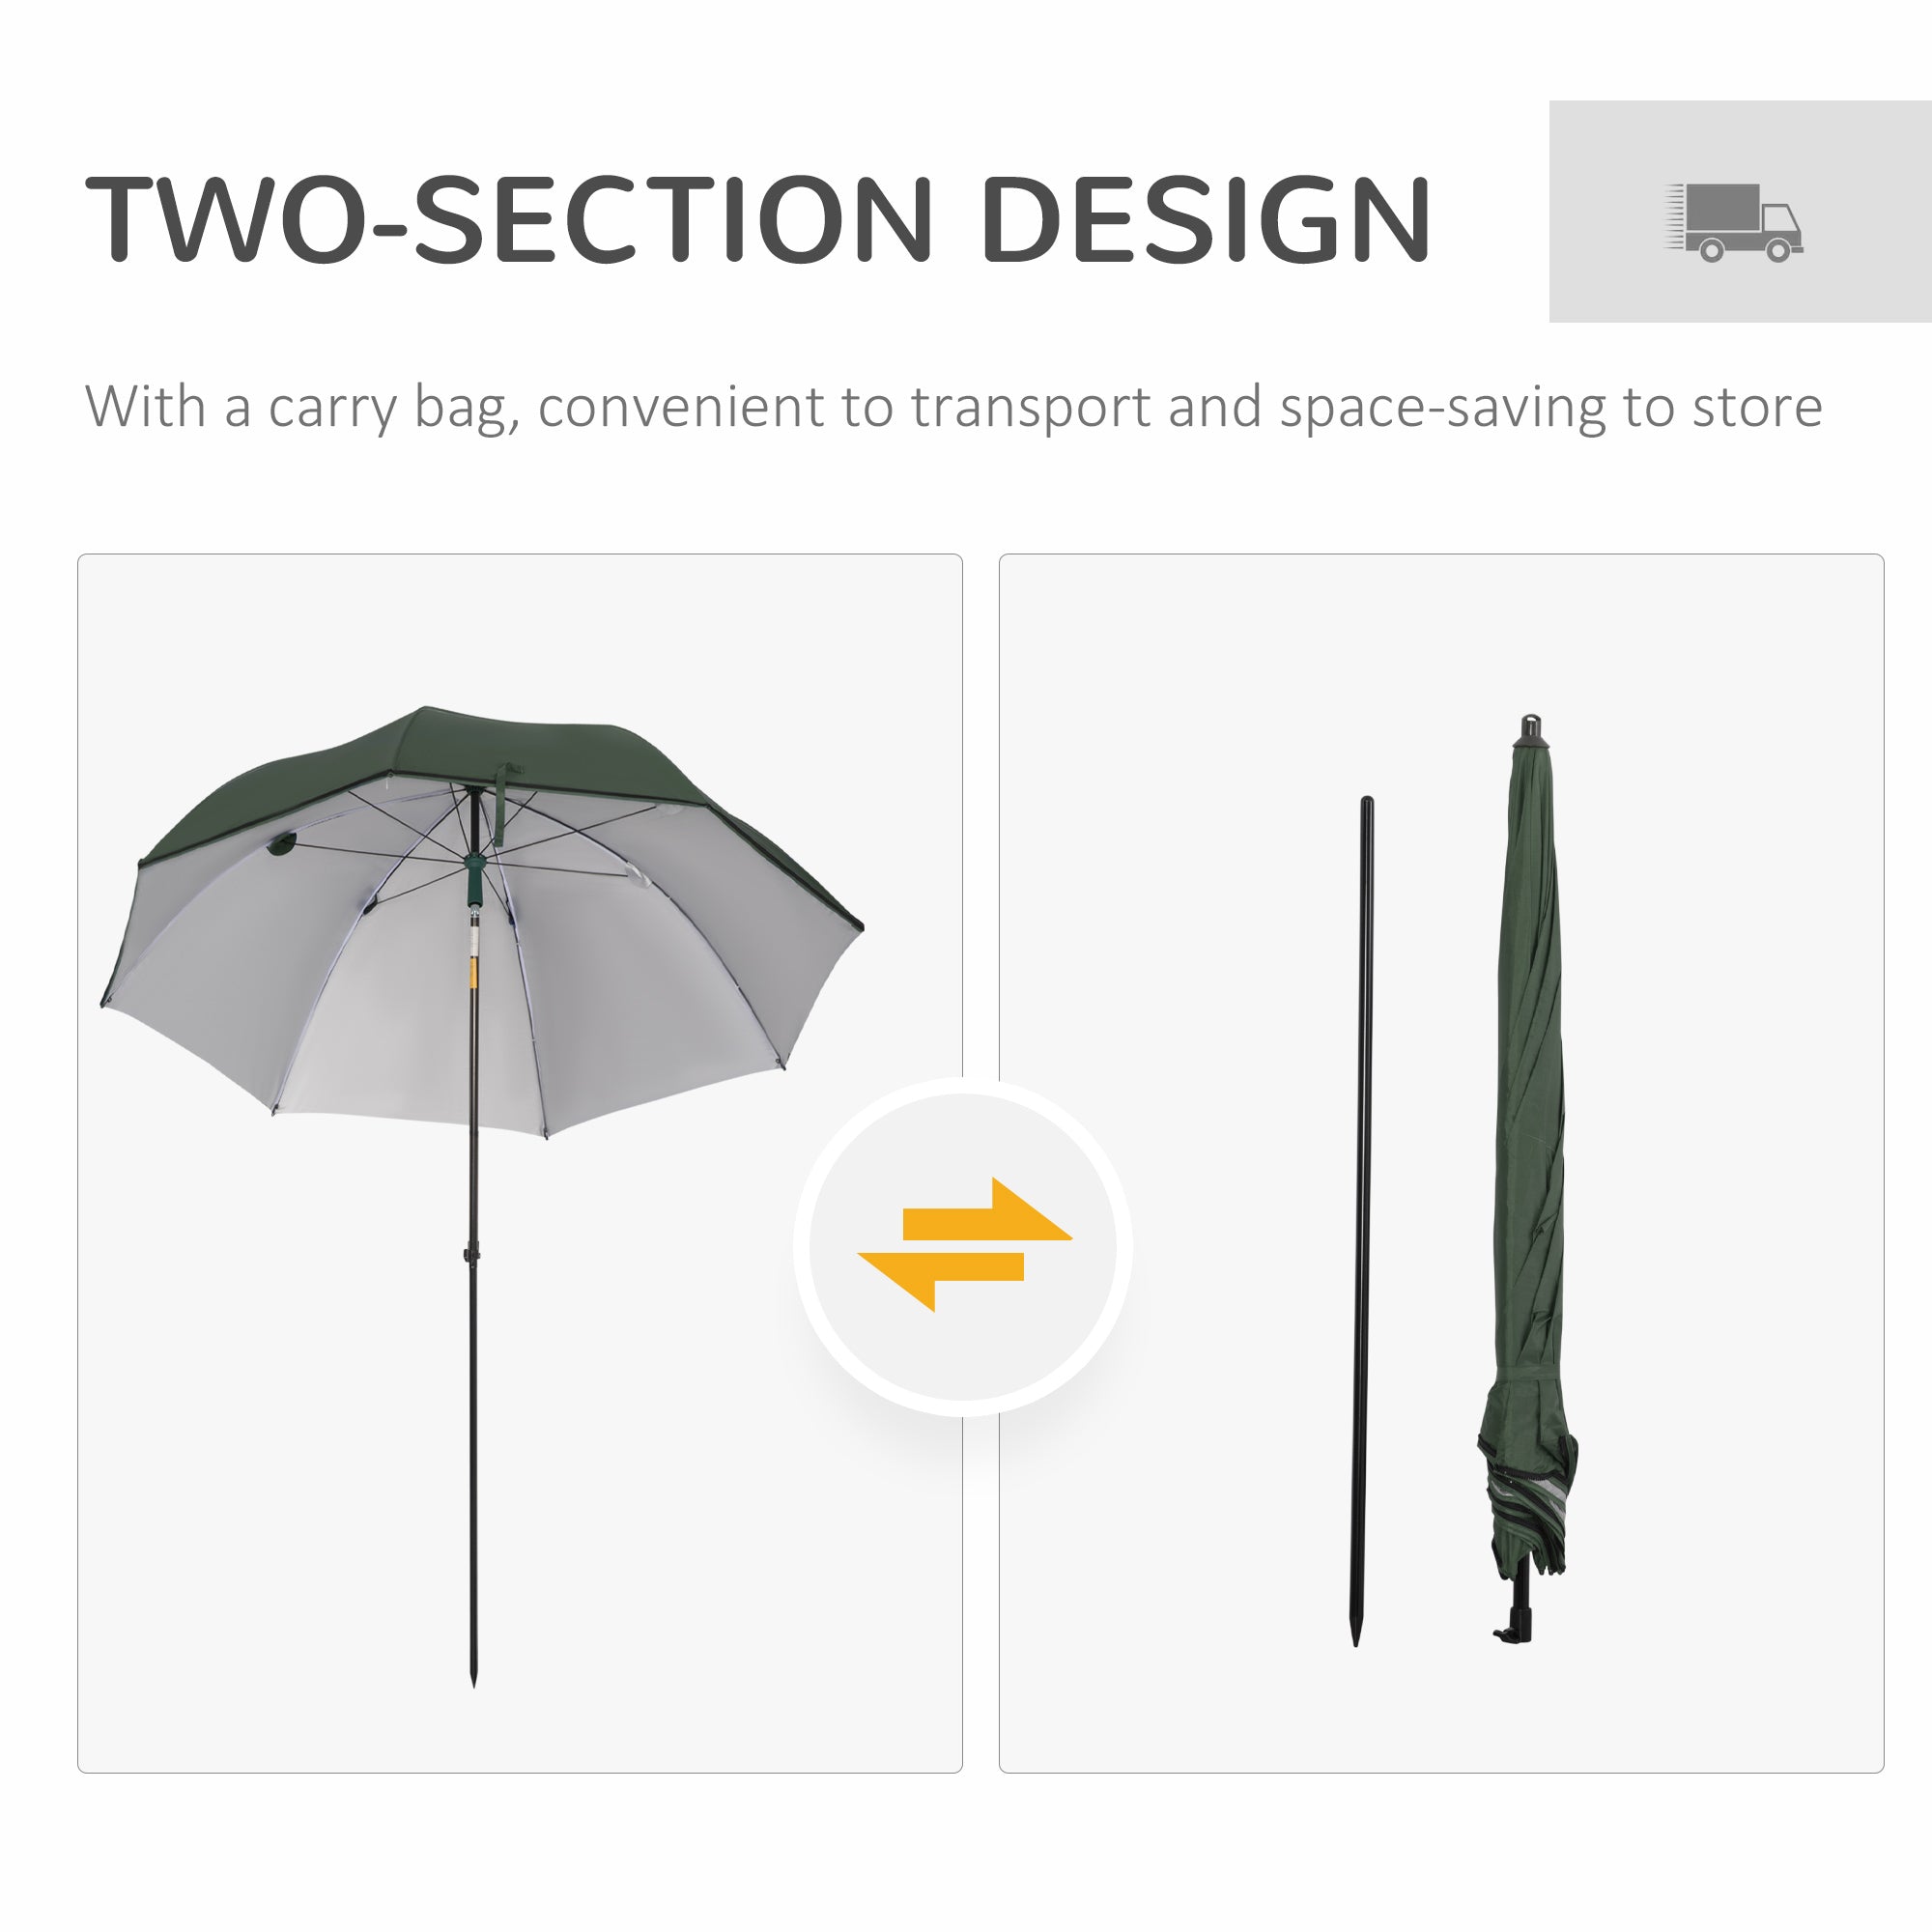 Outsunny 2m Beach Parasol Fishing Umbrella Brolly with Sides and Push Botton Tilt Sun Shade Shelter with Carry Bag, UV30+, Green